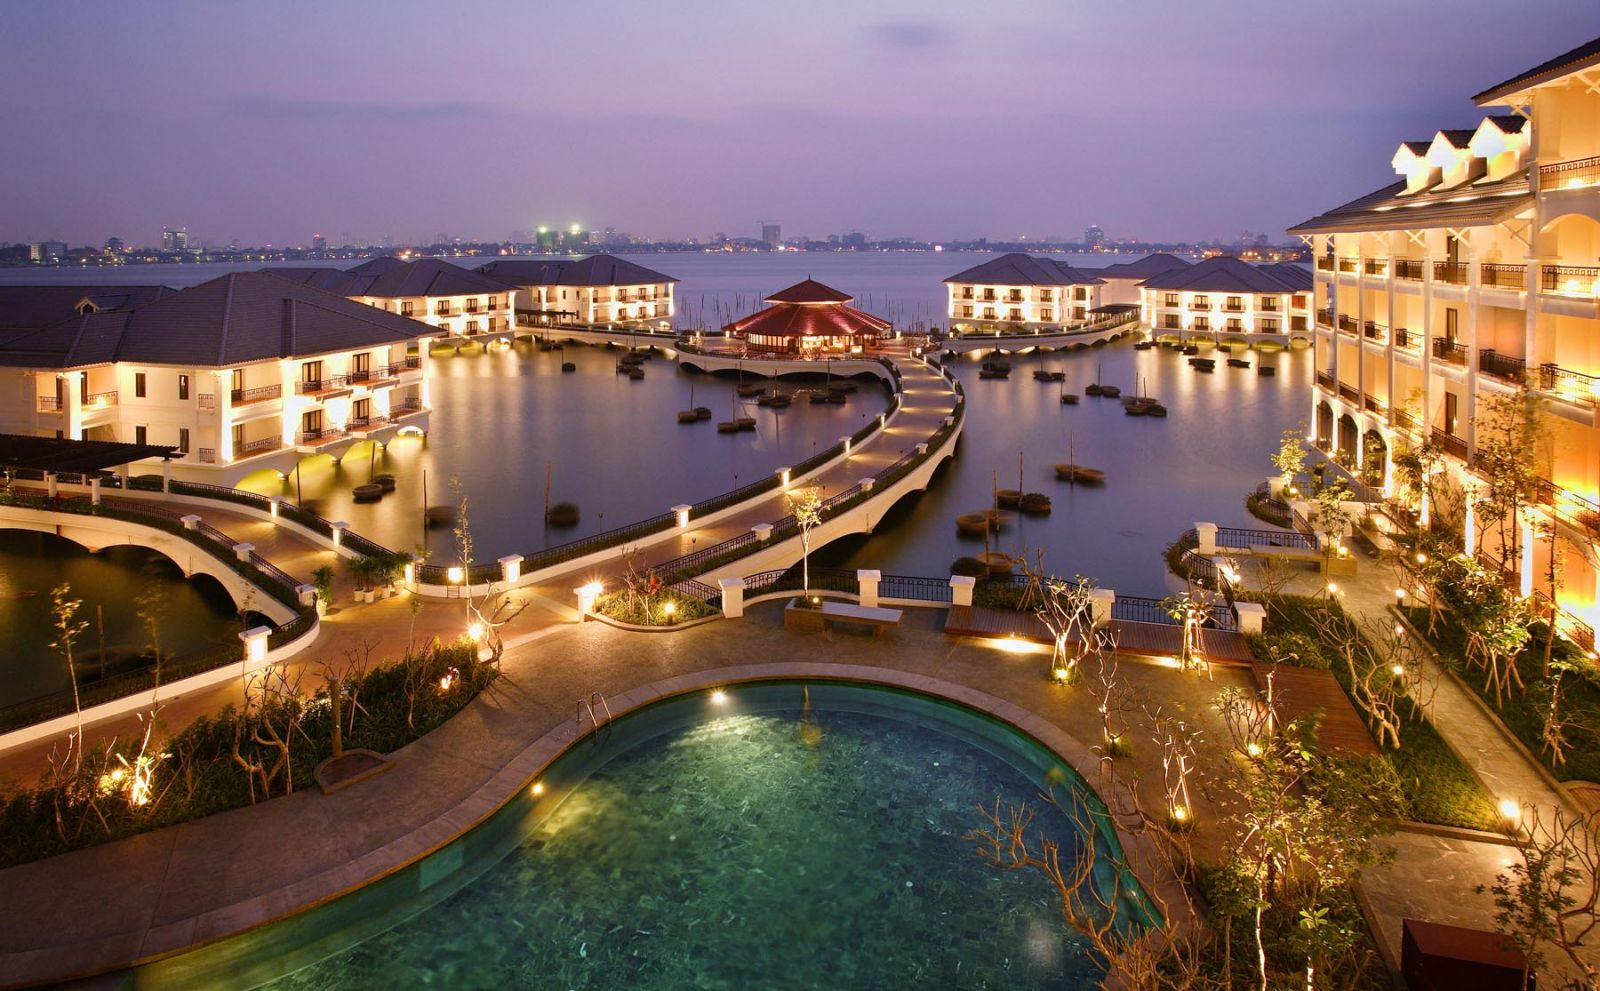 InterContinental Hanoi Westlake takes up thousands of square metres of West Lake's surface.